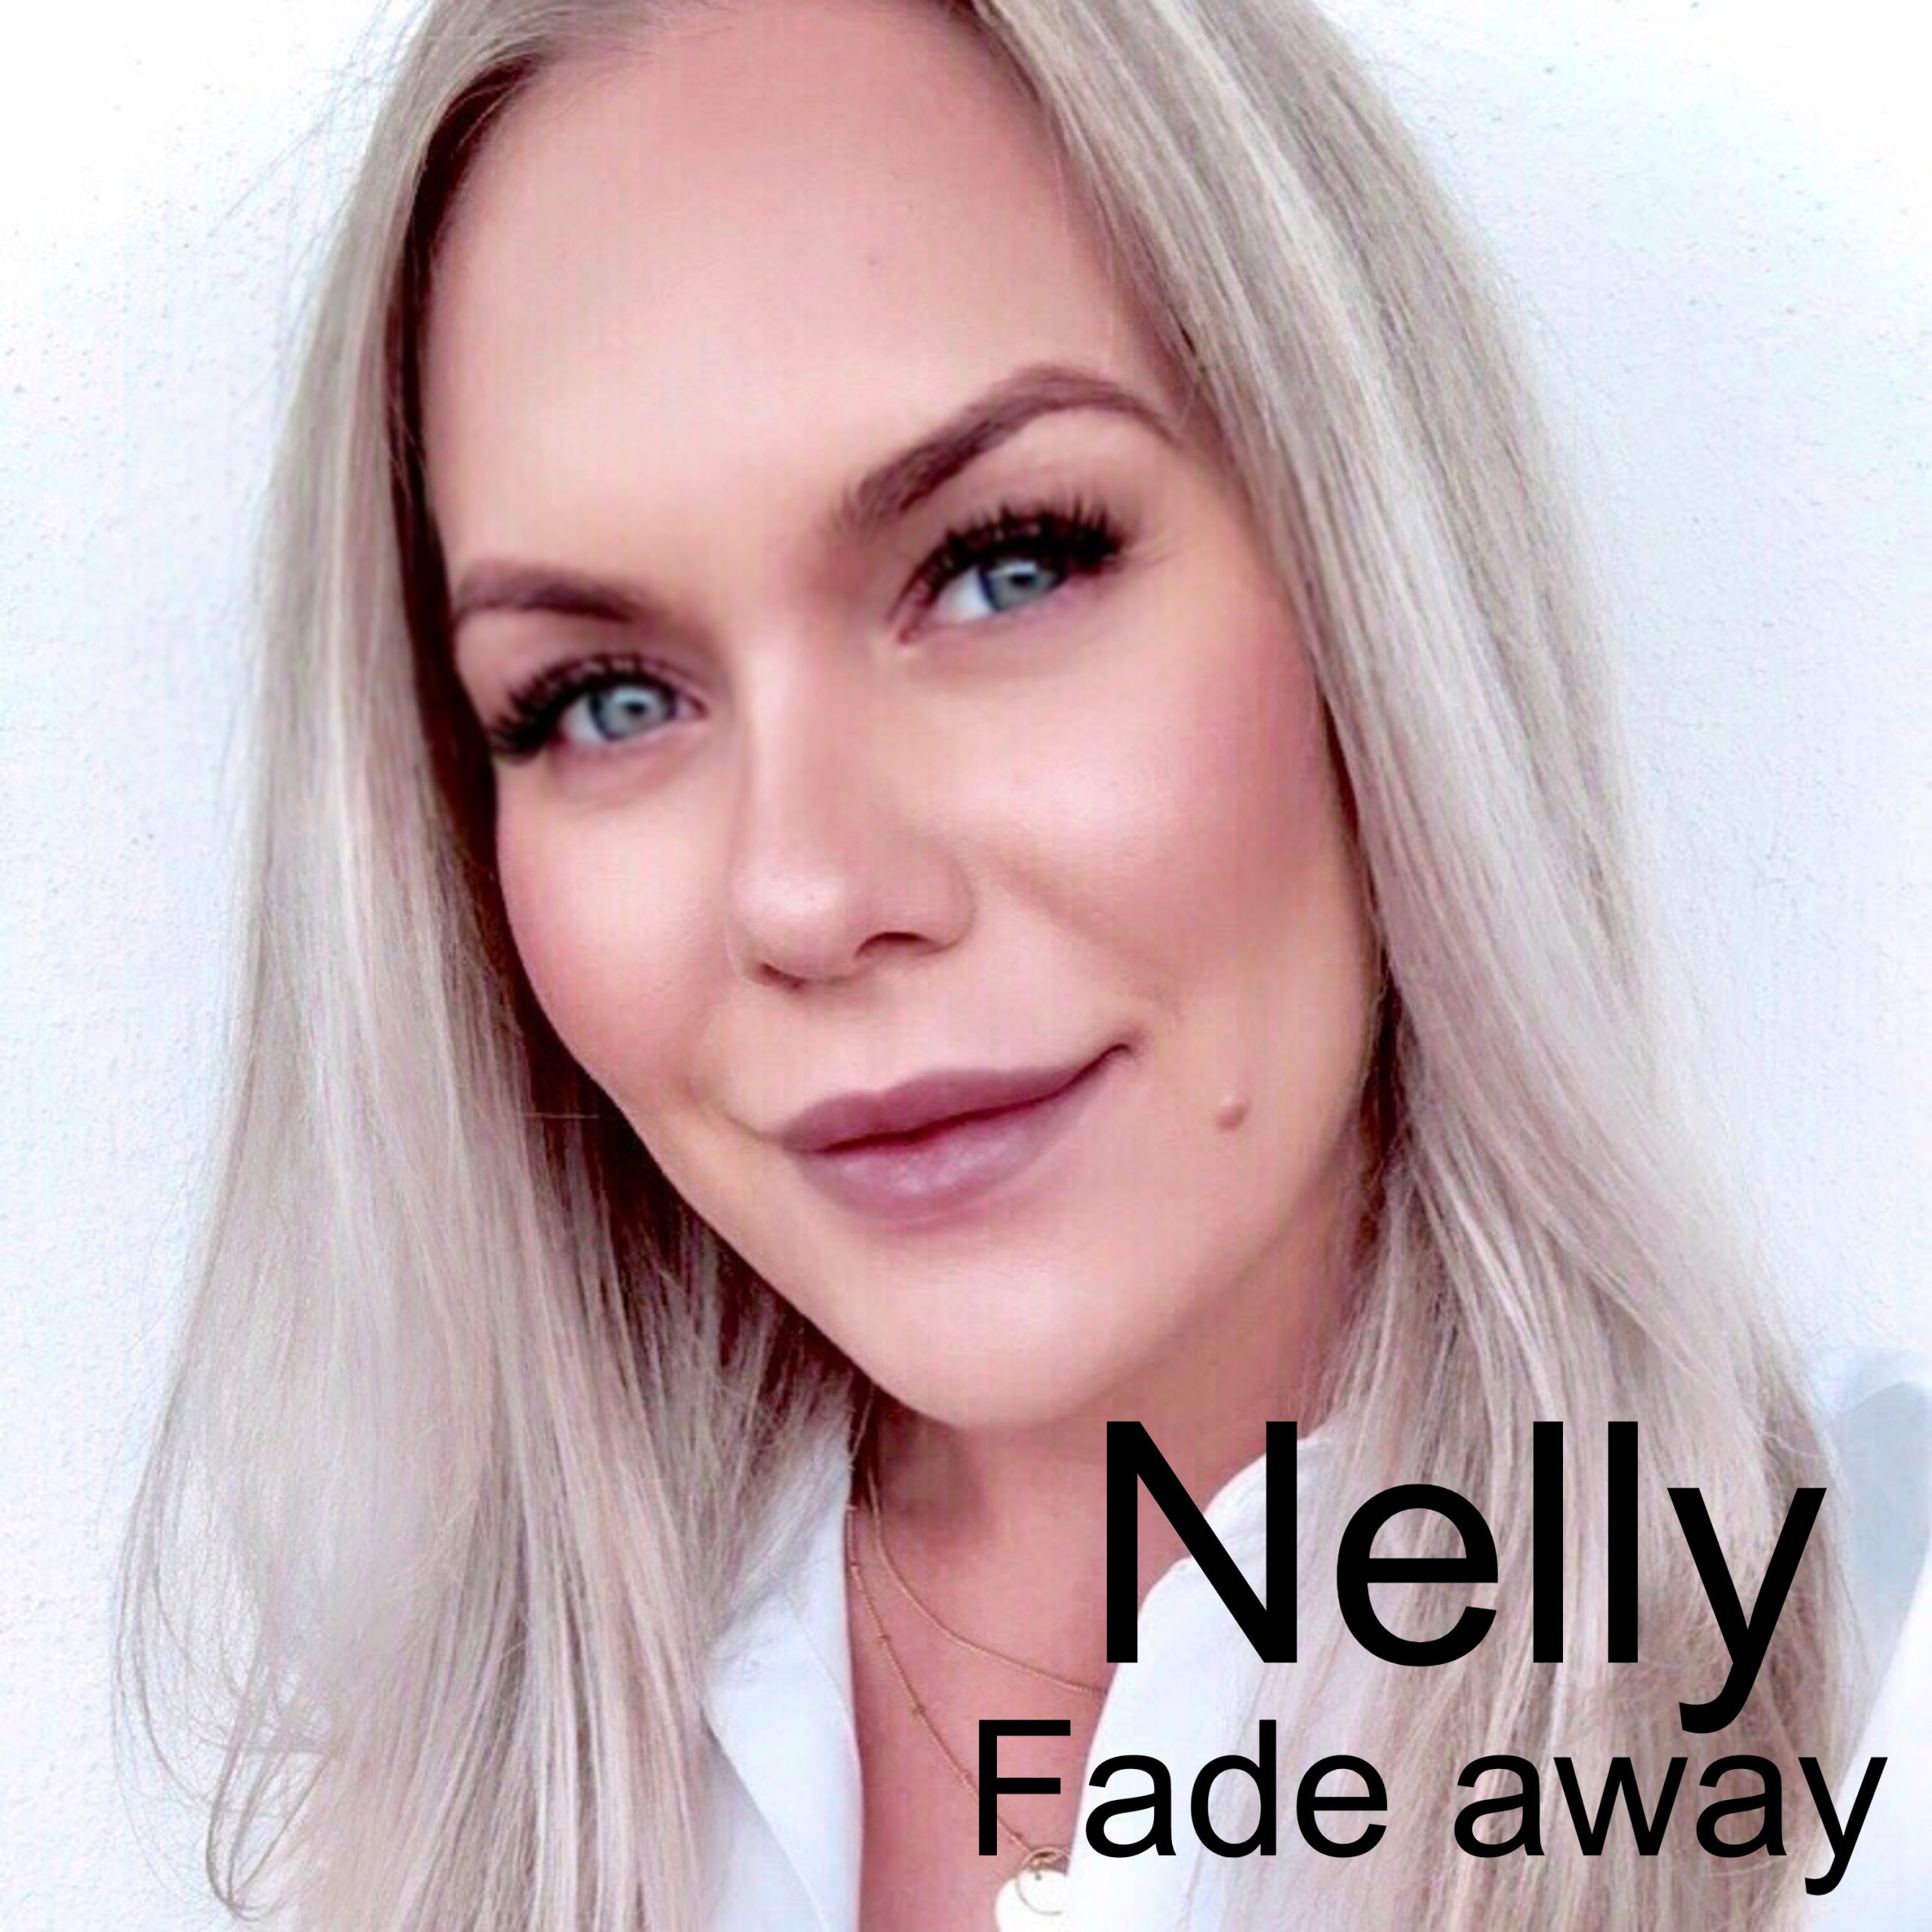 POP PREMIERES: A Beautiful Voice that takes you to the Clouds arrives in the form of ‘Nelly’ and her timeless ‘Fade Away’